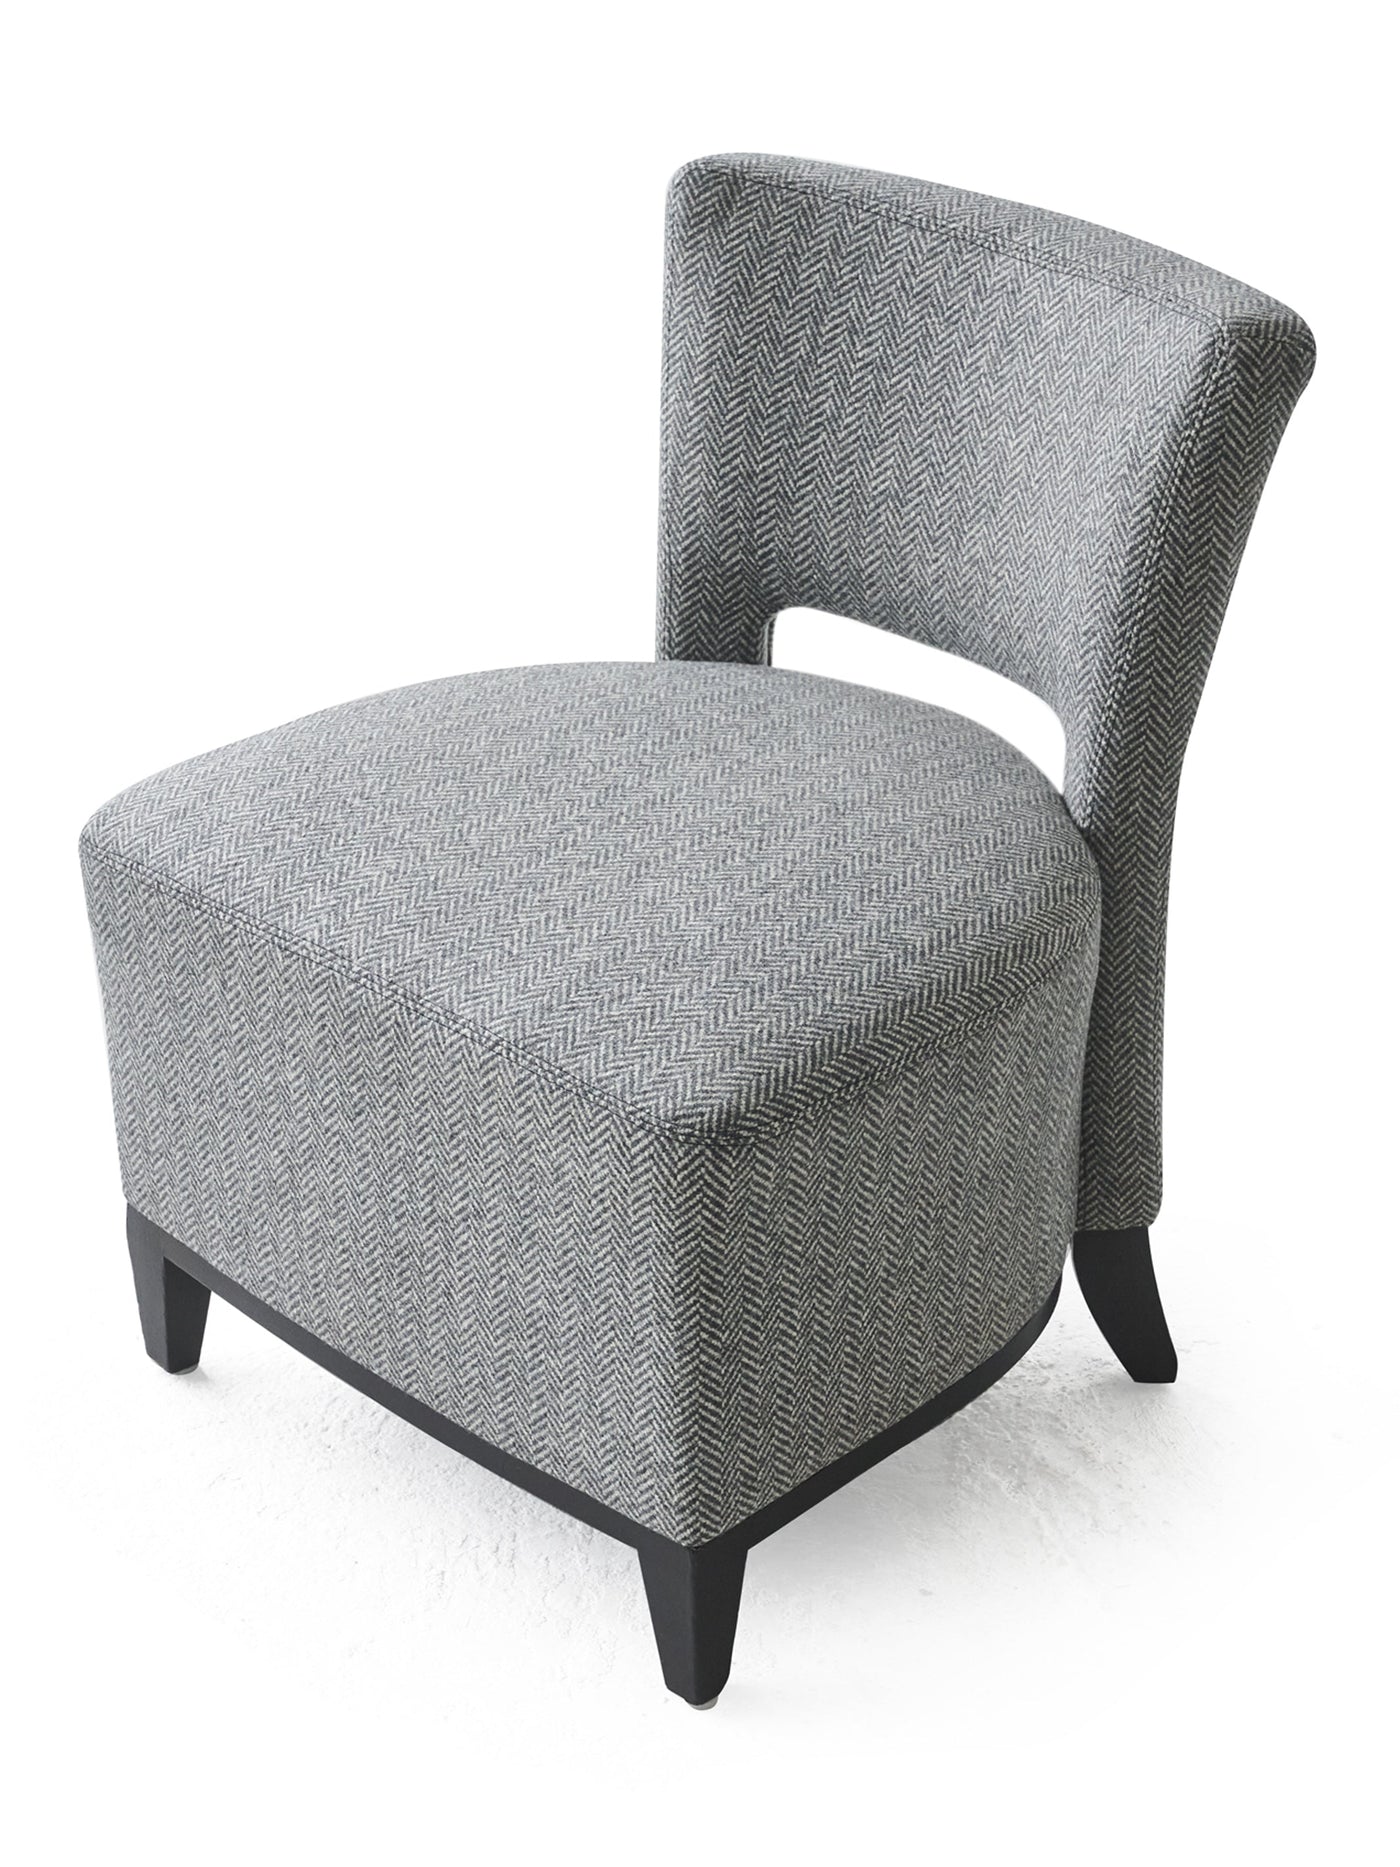 Pair of Low Chairs in Grey Cashmere from The Upper House